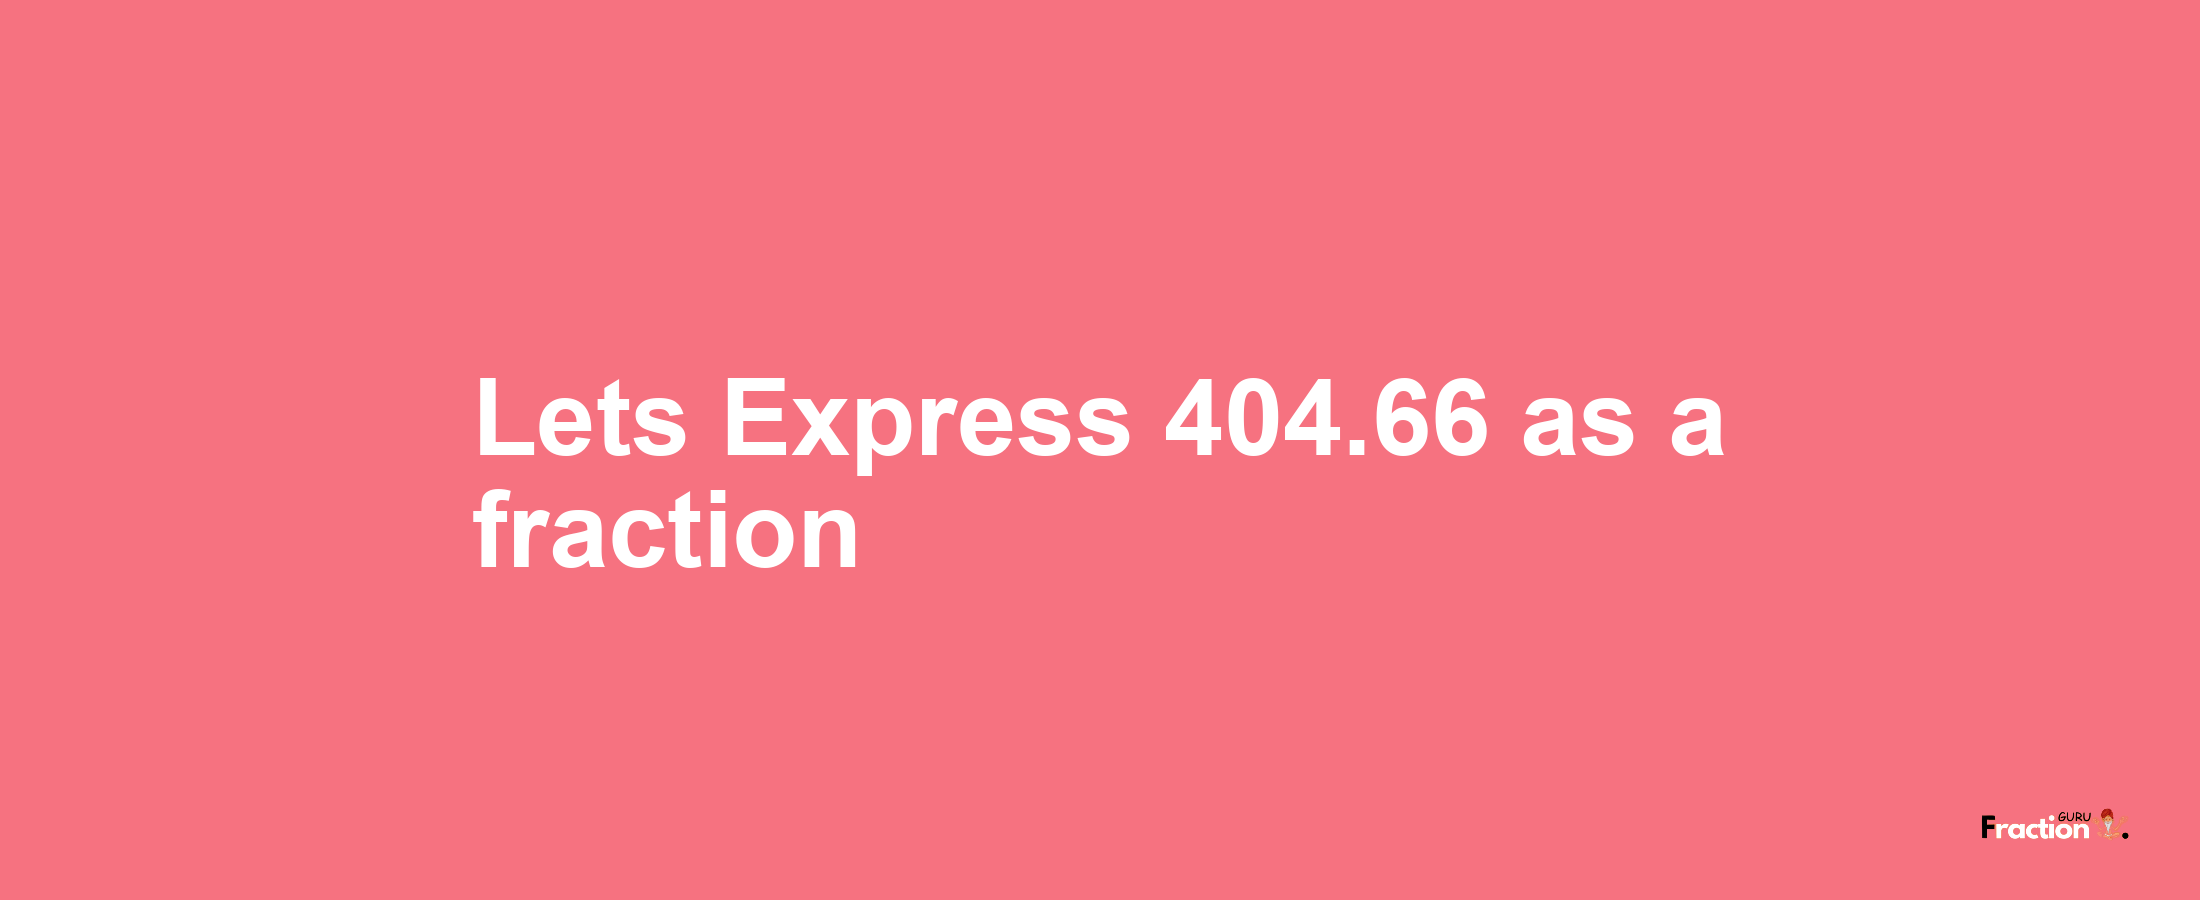 Lets Express 404.66 as afraction